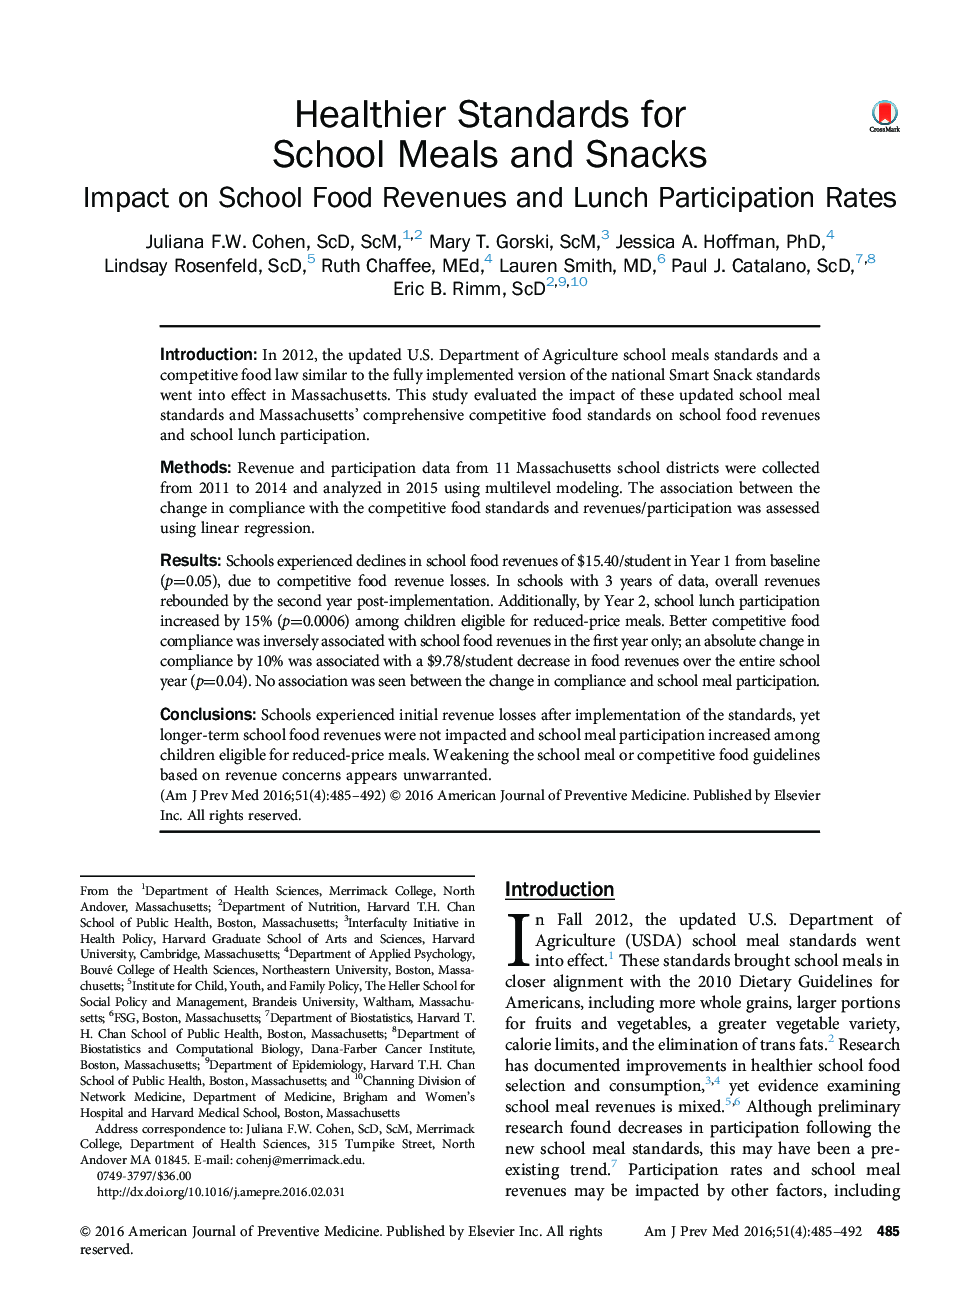 Healthier Standards for School Meals and Snacks: Impact on School Food Revenues and Lunch Participation Rates